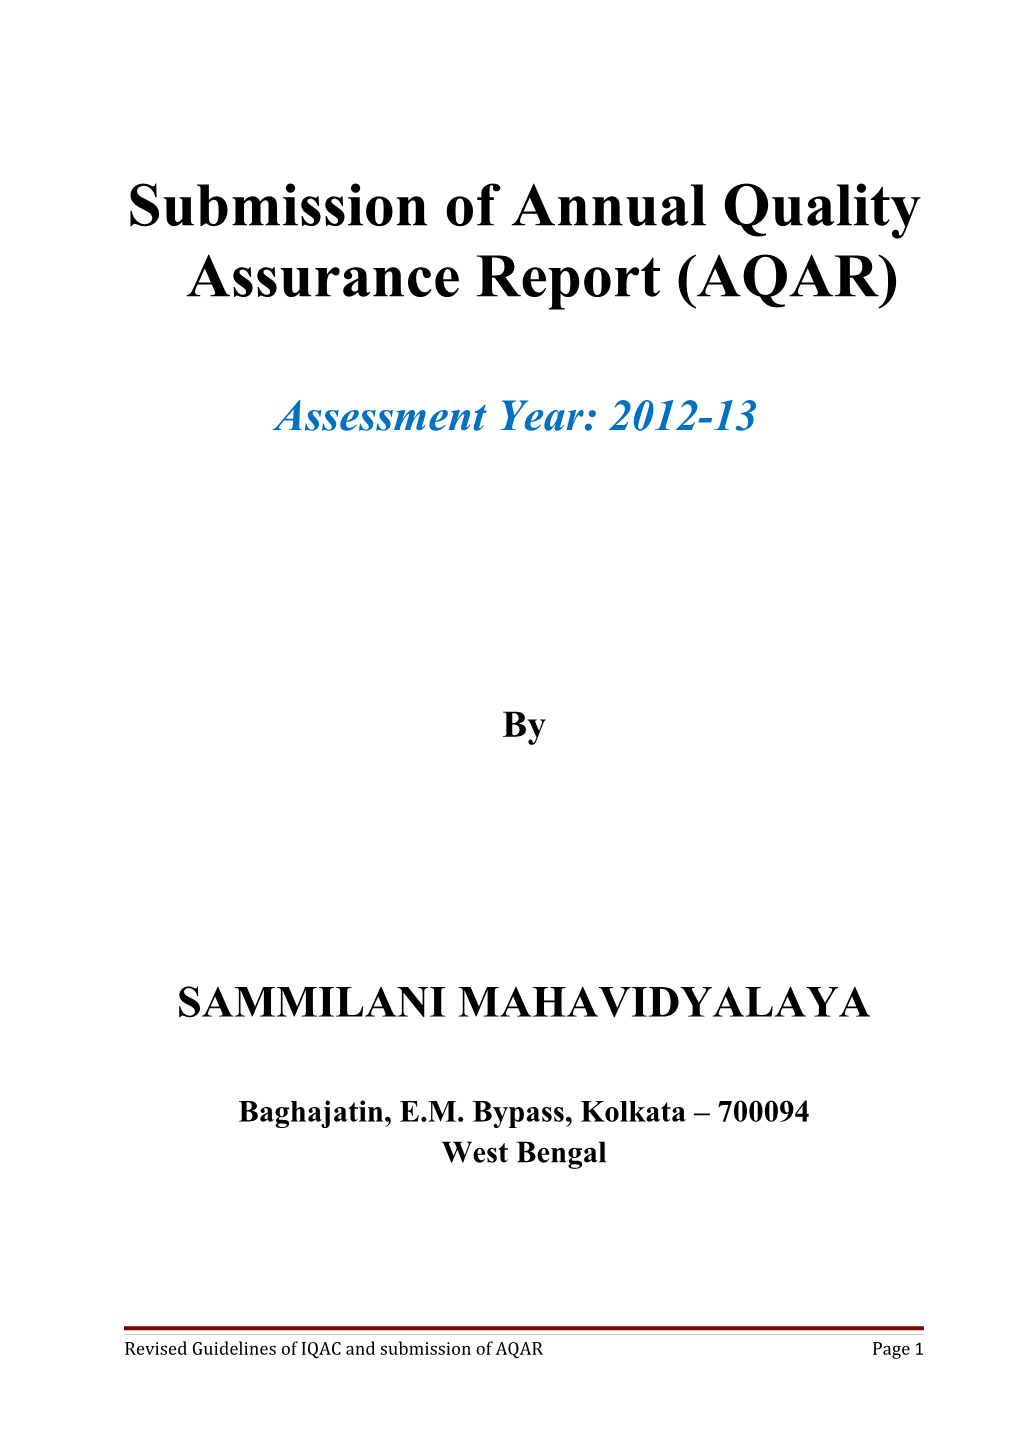 Submission of Annual Quality Assurance Report (AQAR)